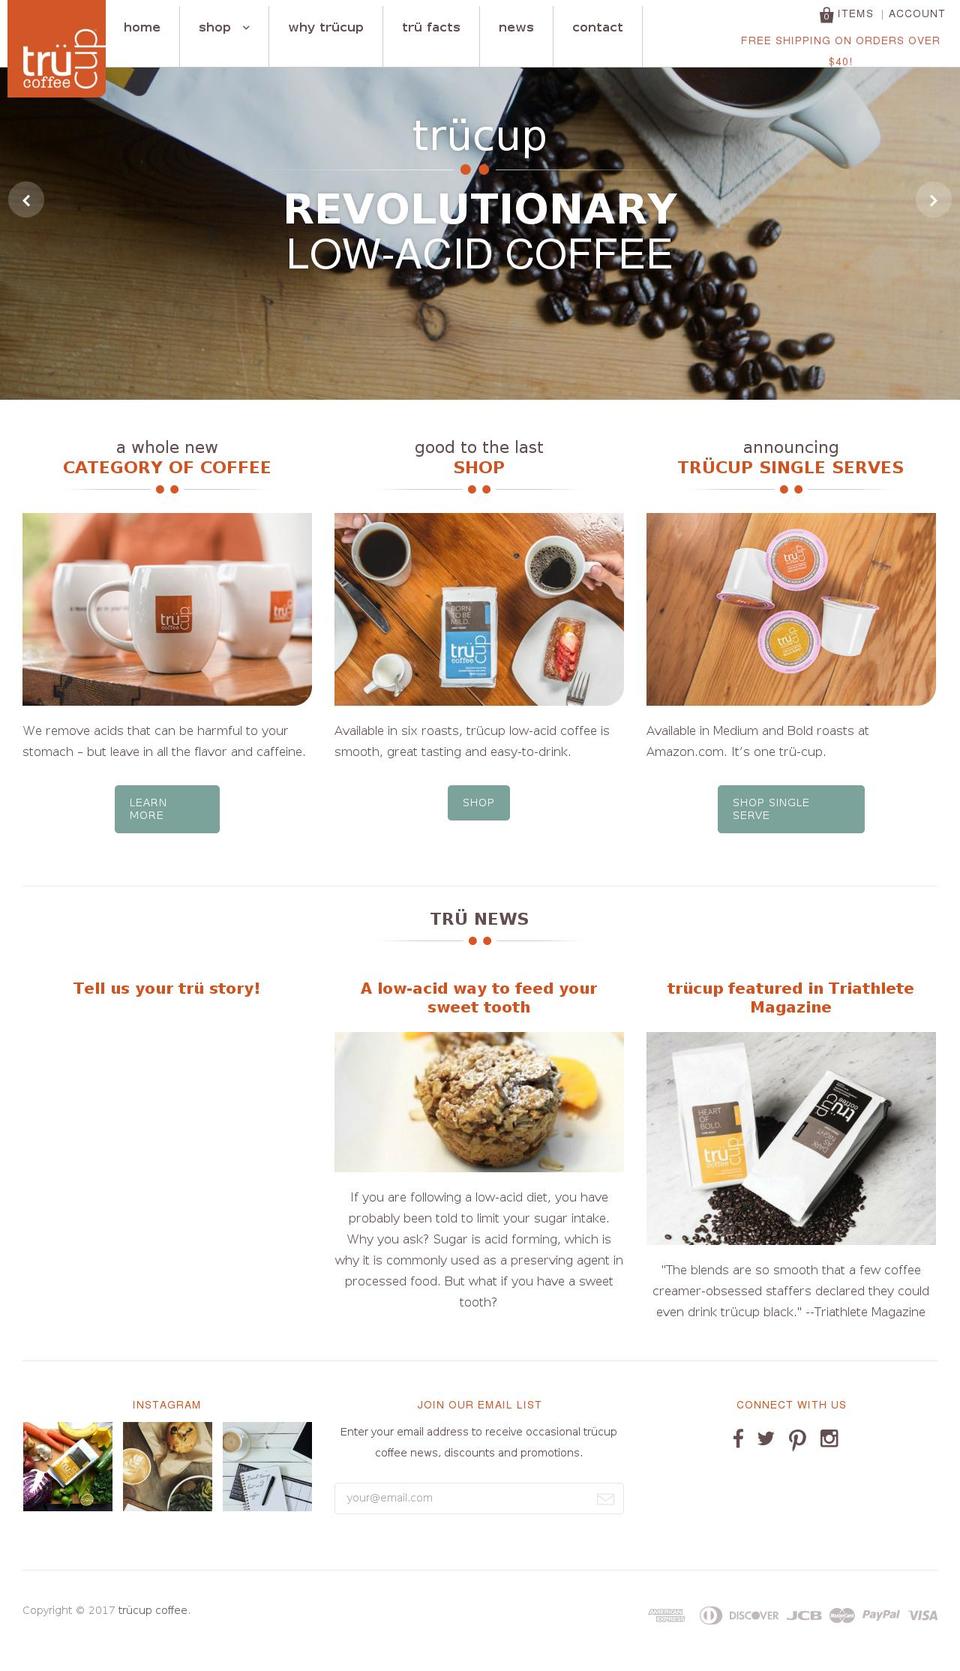 Pacific Shopify theme site example trucup.com